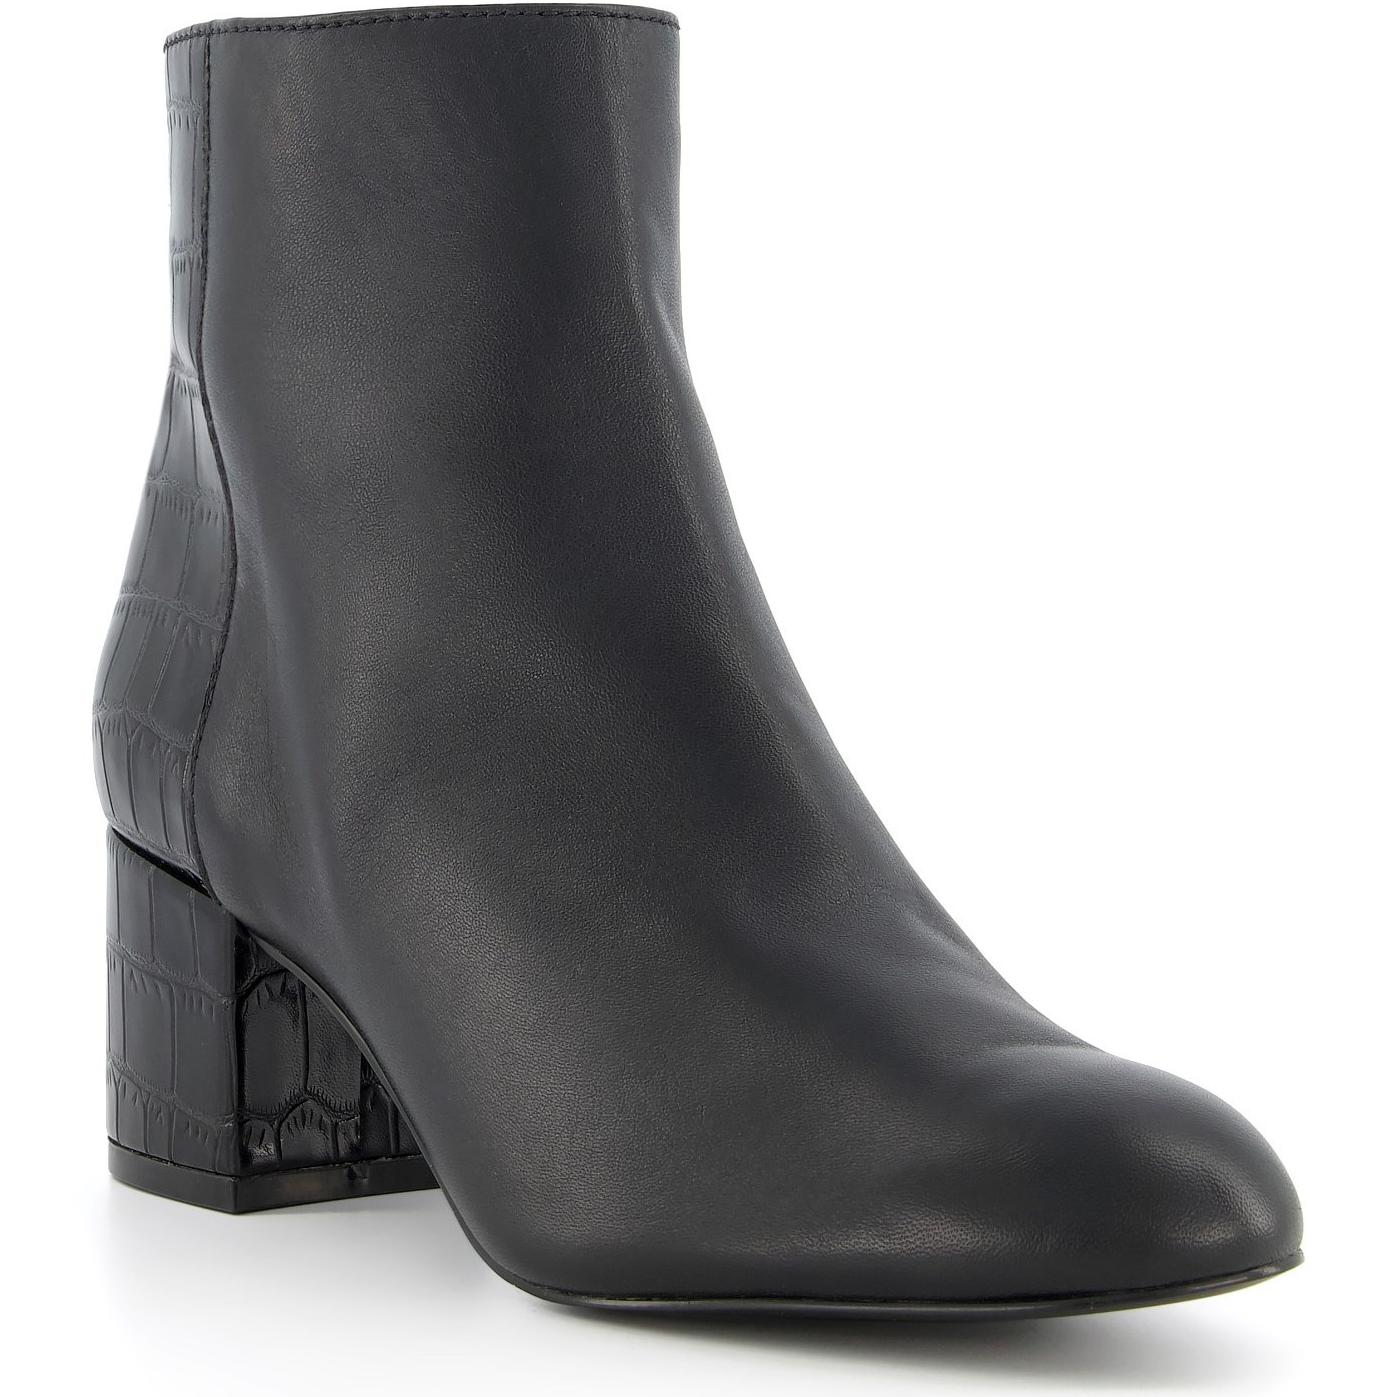 Dune London Oleah Ankle Boots